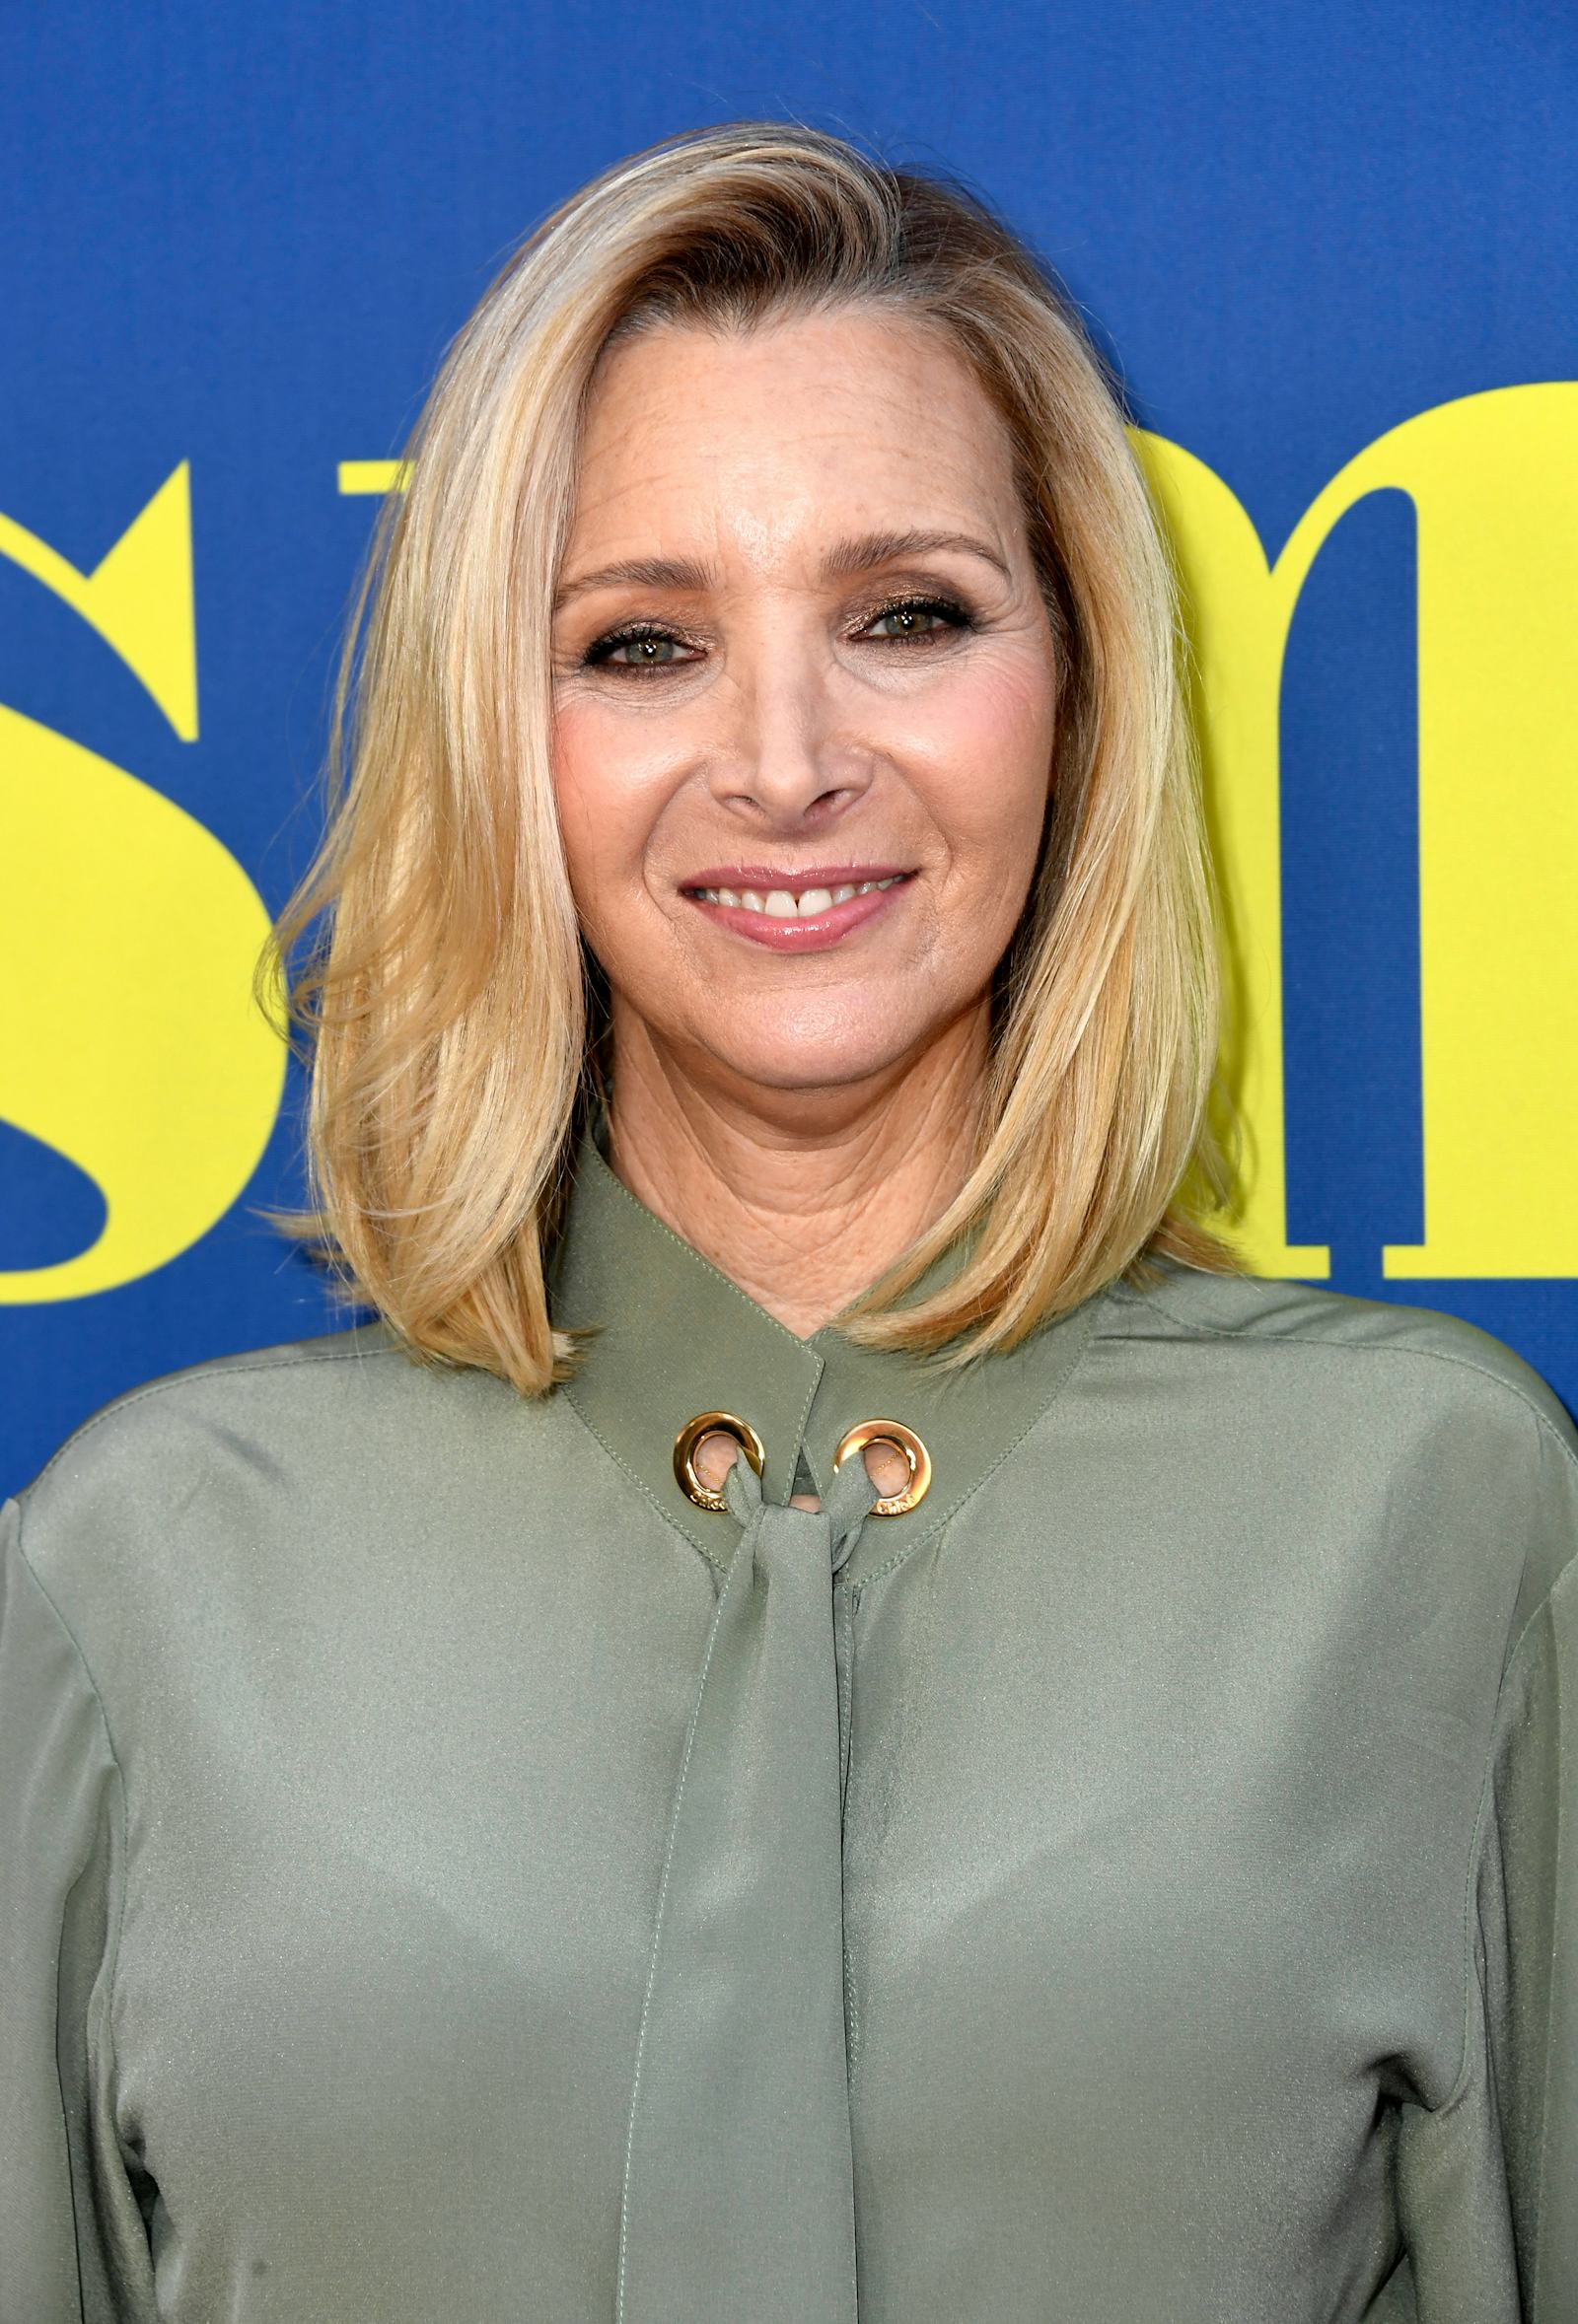 Lisa Kudrow Opened Up About Body Image Struggles While Filming ‘Friends